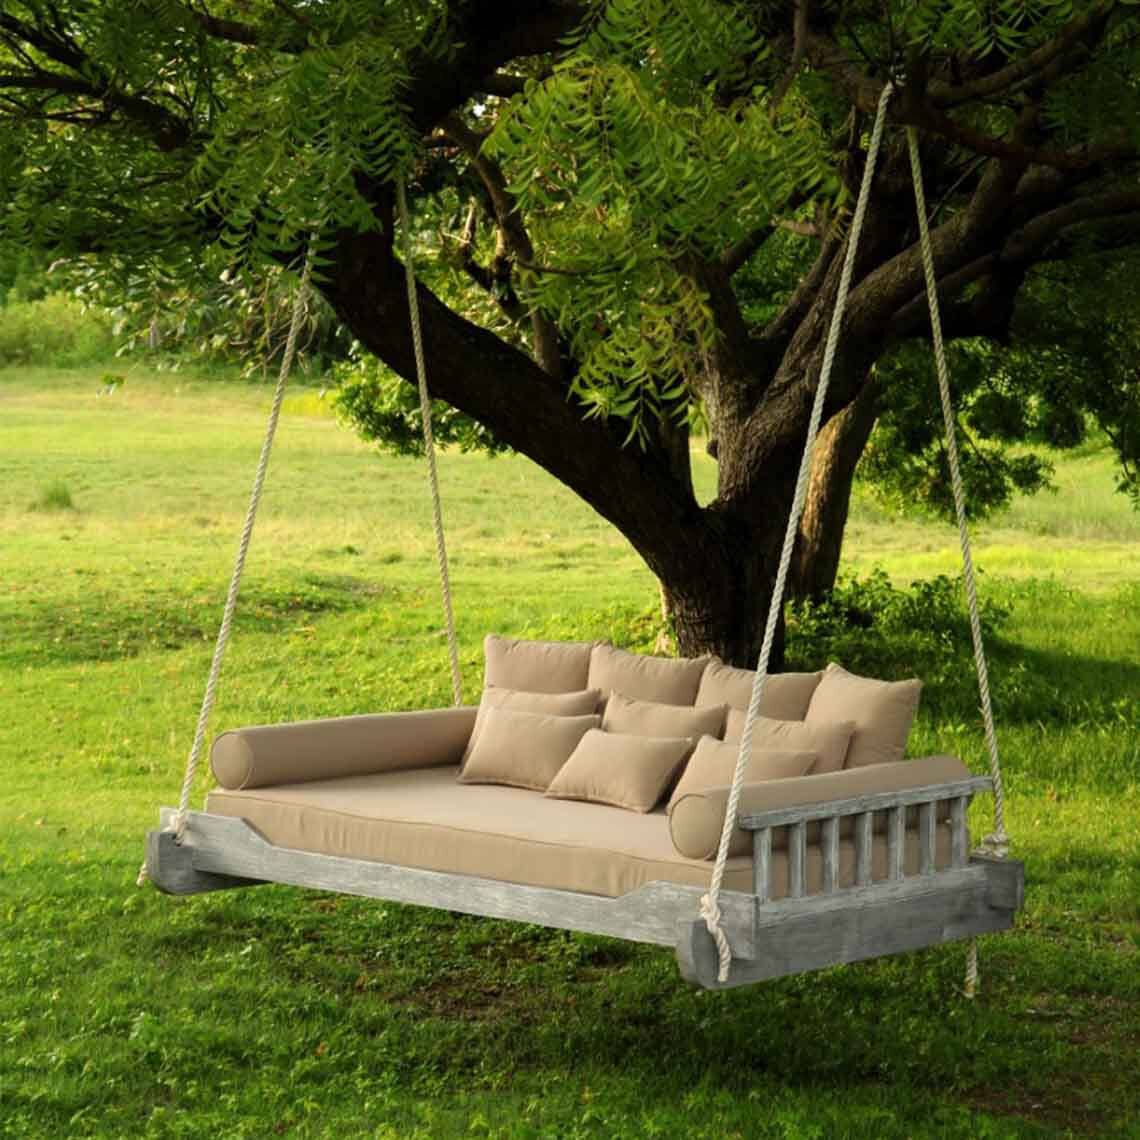 Scratch and Dent - Montana Rope Porch Swing Bed with Cushions and Pillows | Grade A Teak | Queen-Sized - FINAL SALE